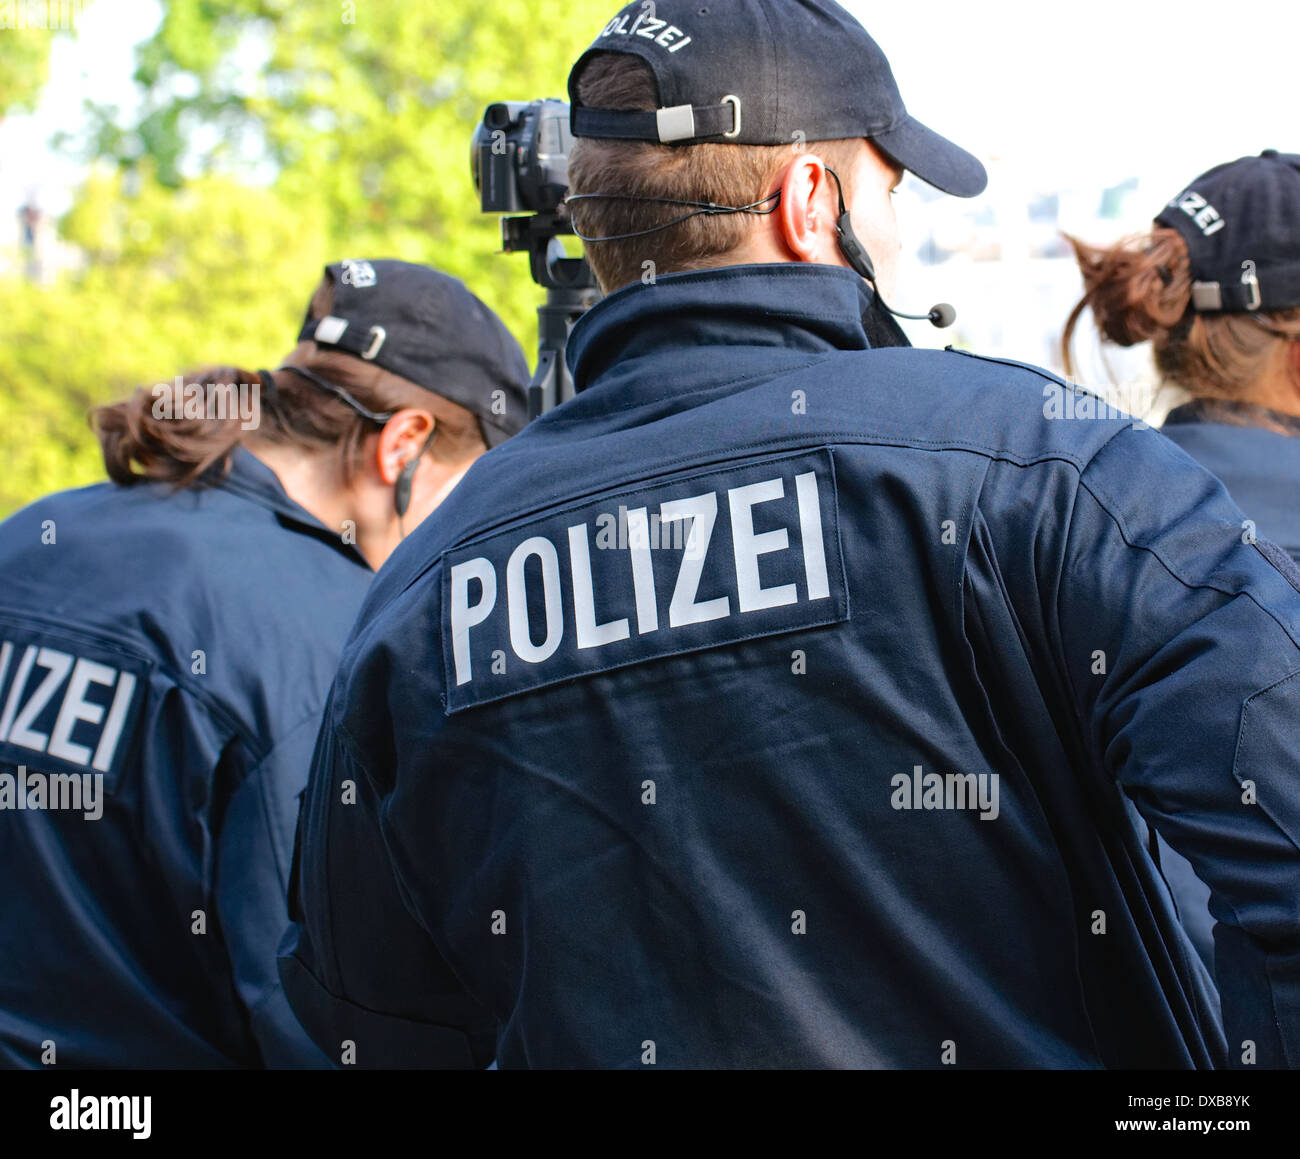 Group of German police officers seen from behind wearing uniforms marked  "Polizei" during May Day protests in Hamburg, Germany Stock Photo - Alamy